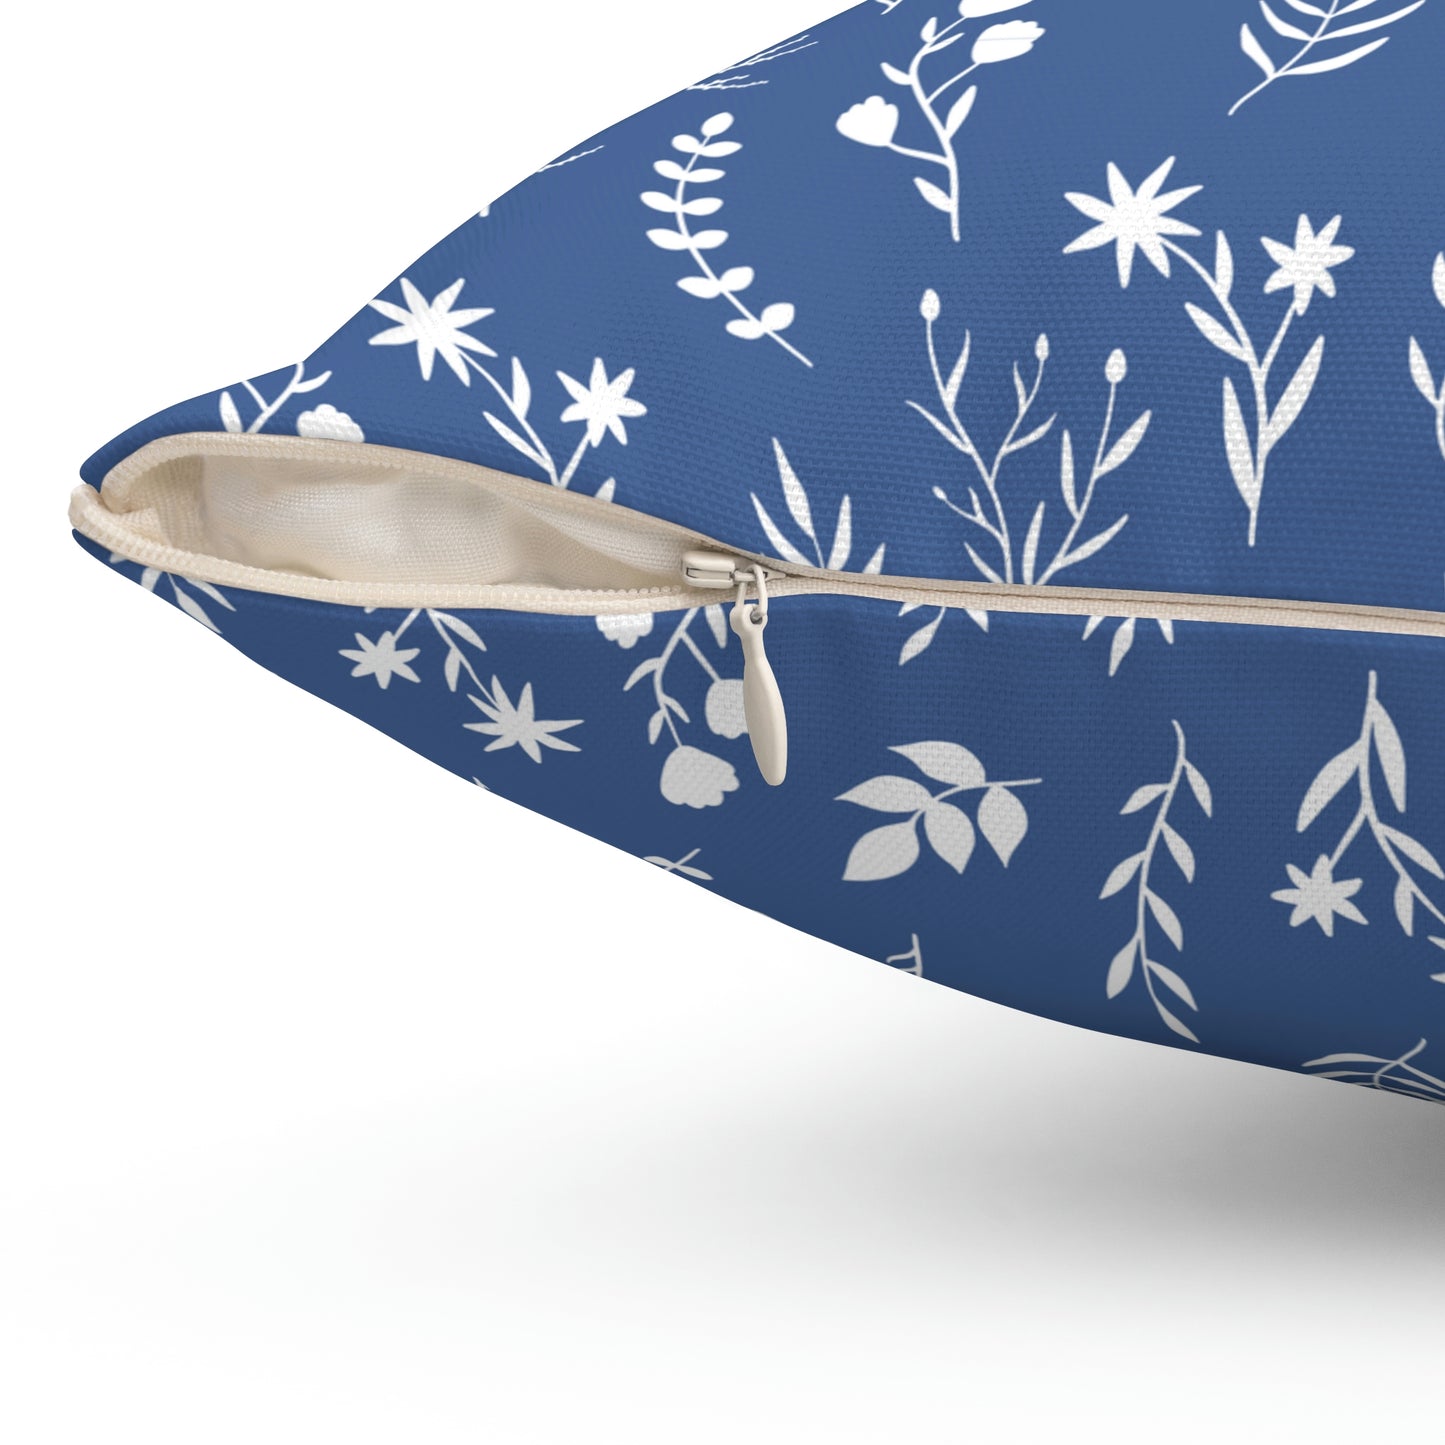 Indigo Blue and White Floral Pillow | 4 Sizes Available